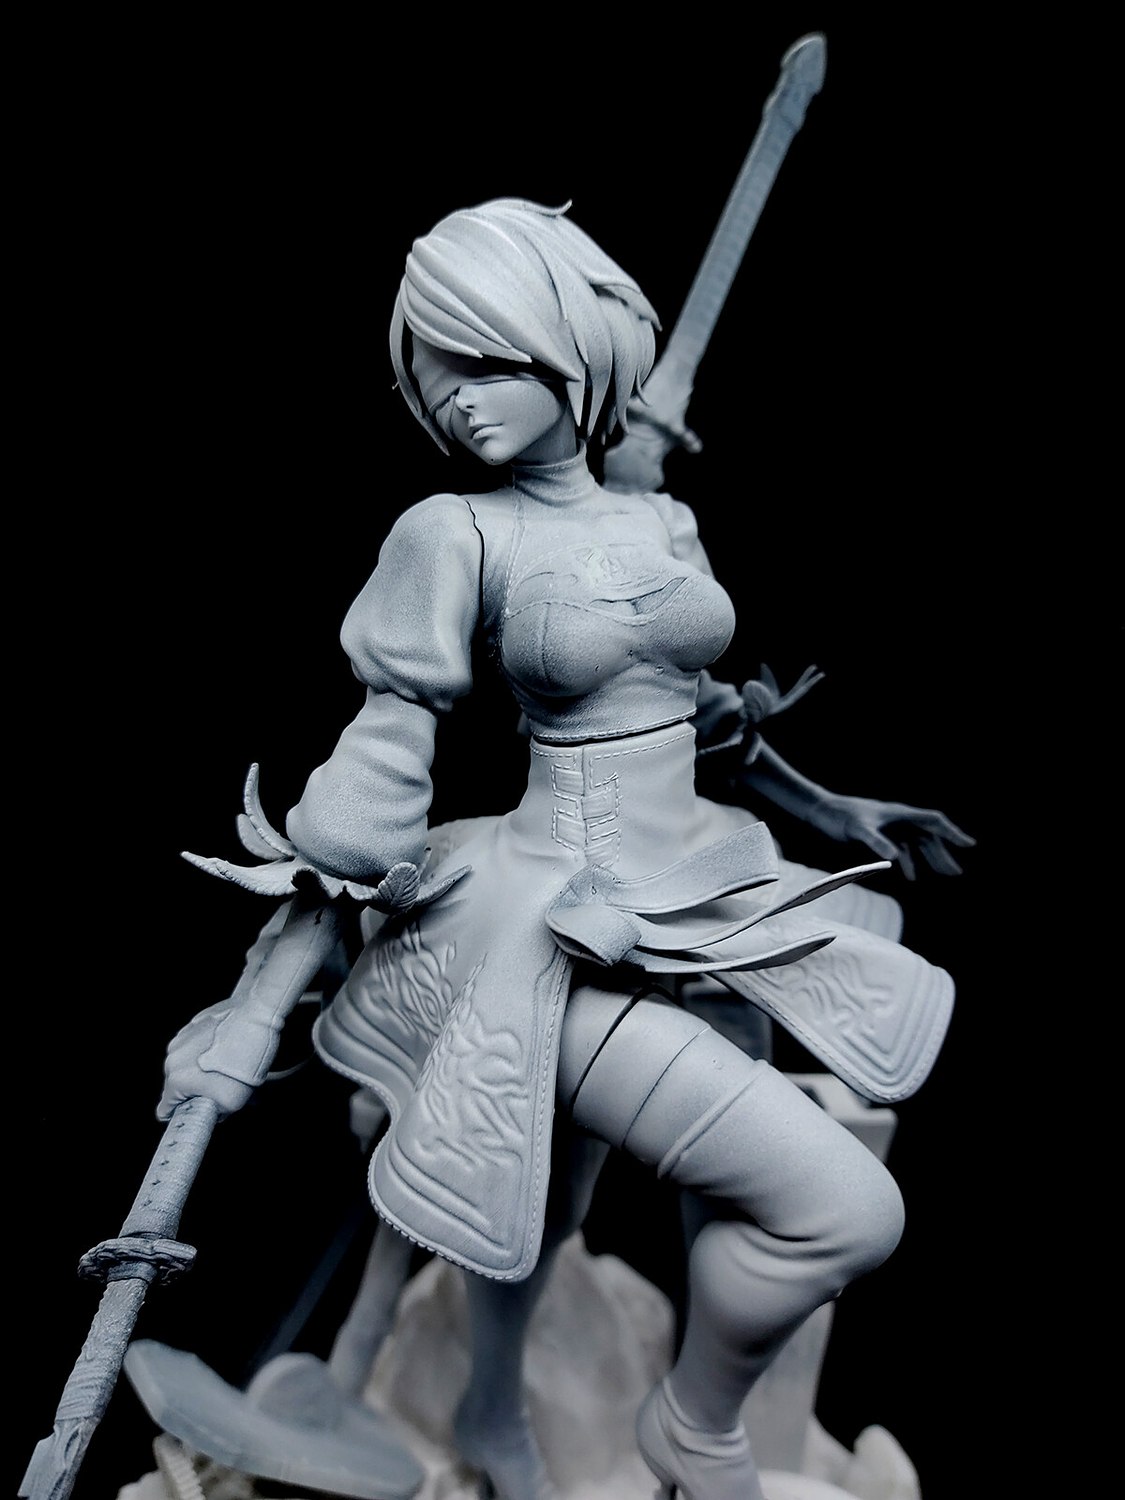 2B From Nier Automata